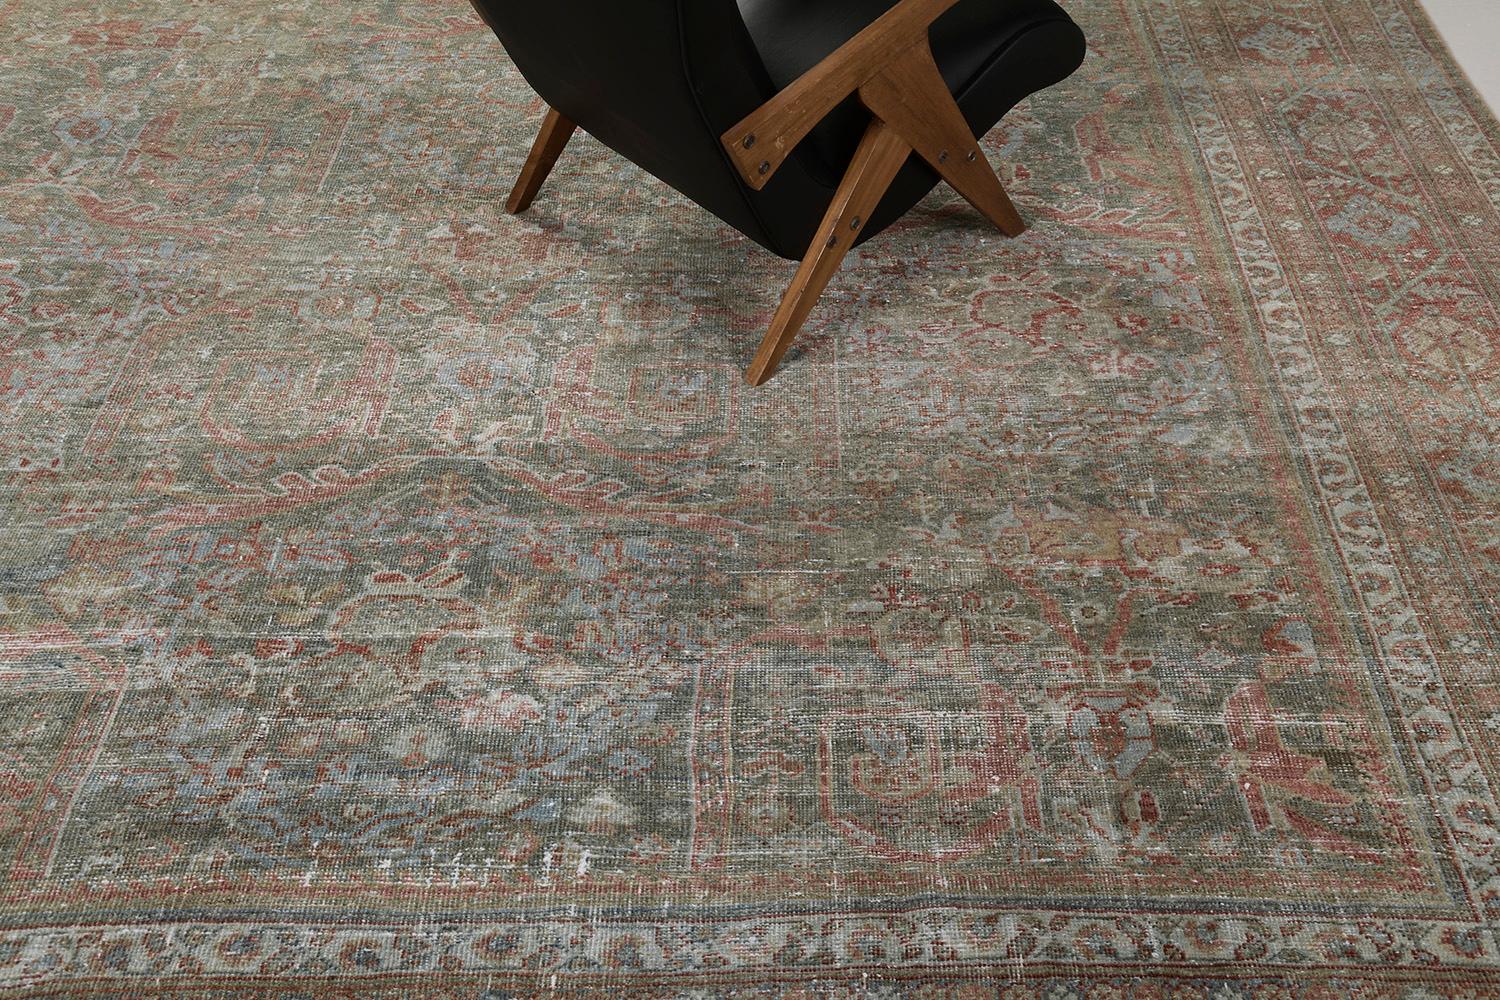 An exquisite antique Persian Mahal rug that features timeless grace and nostalgic appeal. This enchanting rug is enclosed with a botanical border flanked with inner and outer guard bands. The abrashed terracotta field is graciously filled with